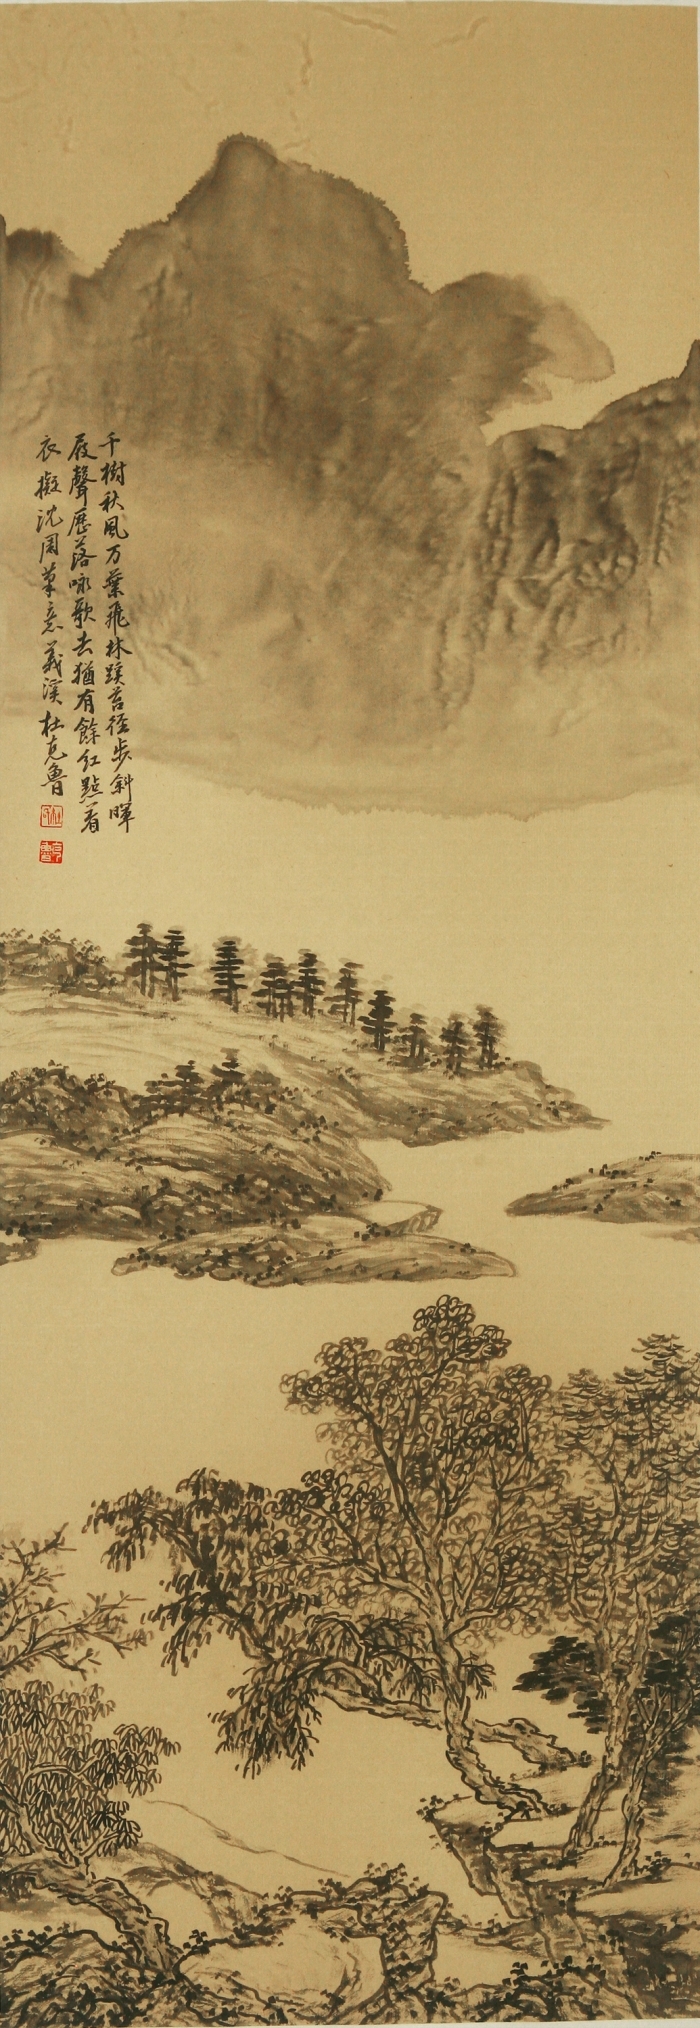 Hefeng Hall Gallery's Contemporary Chinese Painting - Learning form the Past 8